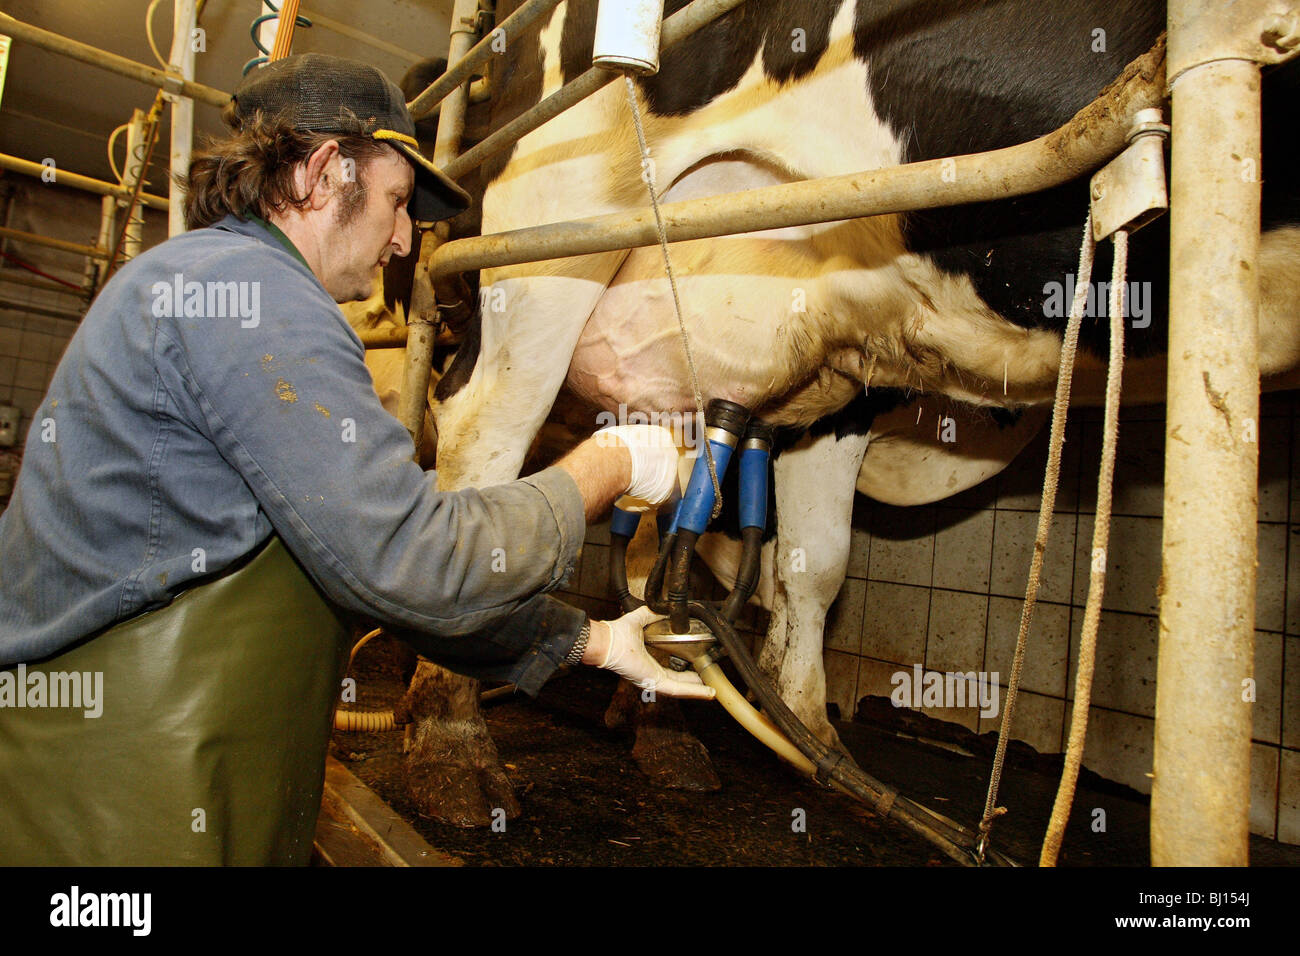 Cows milked with milking machines, Kloster Lehnin, Germany Stock Photo